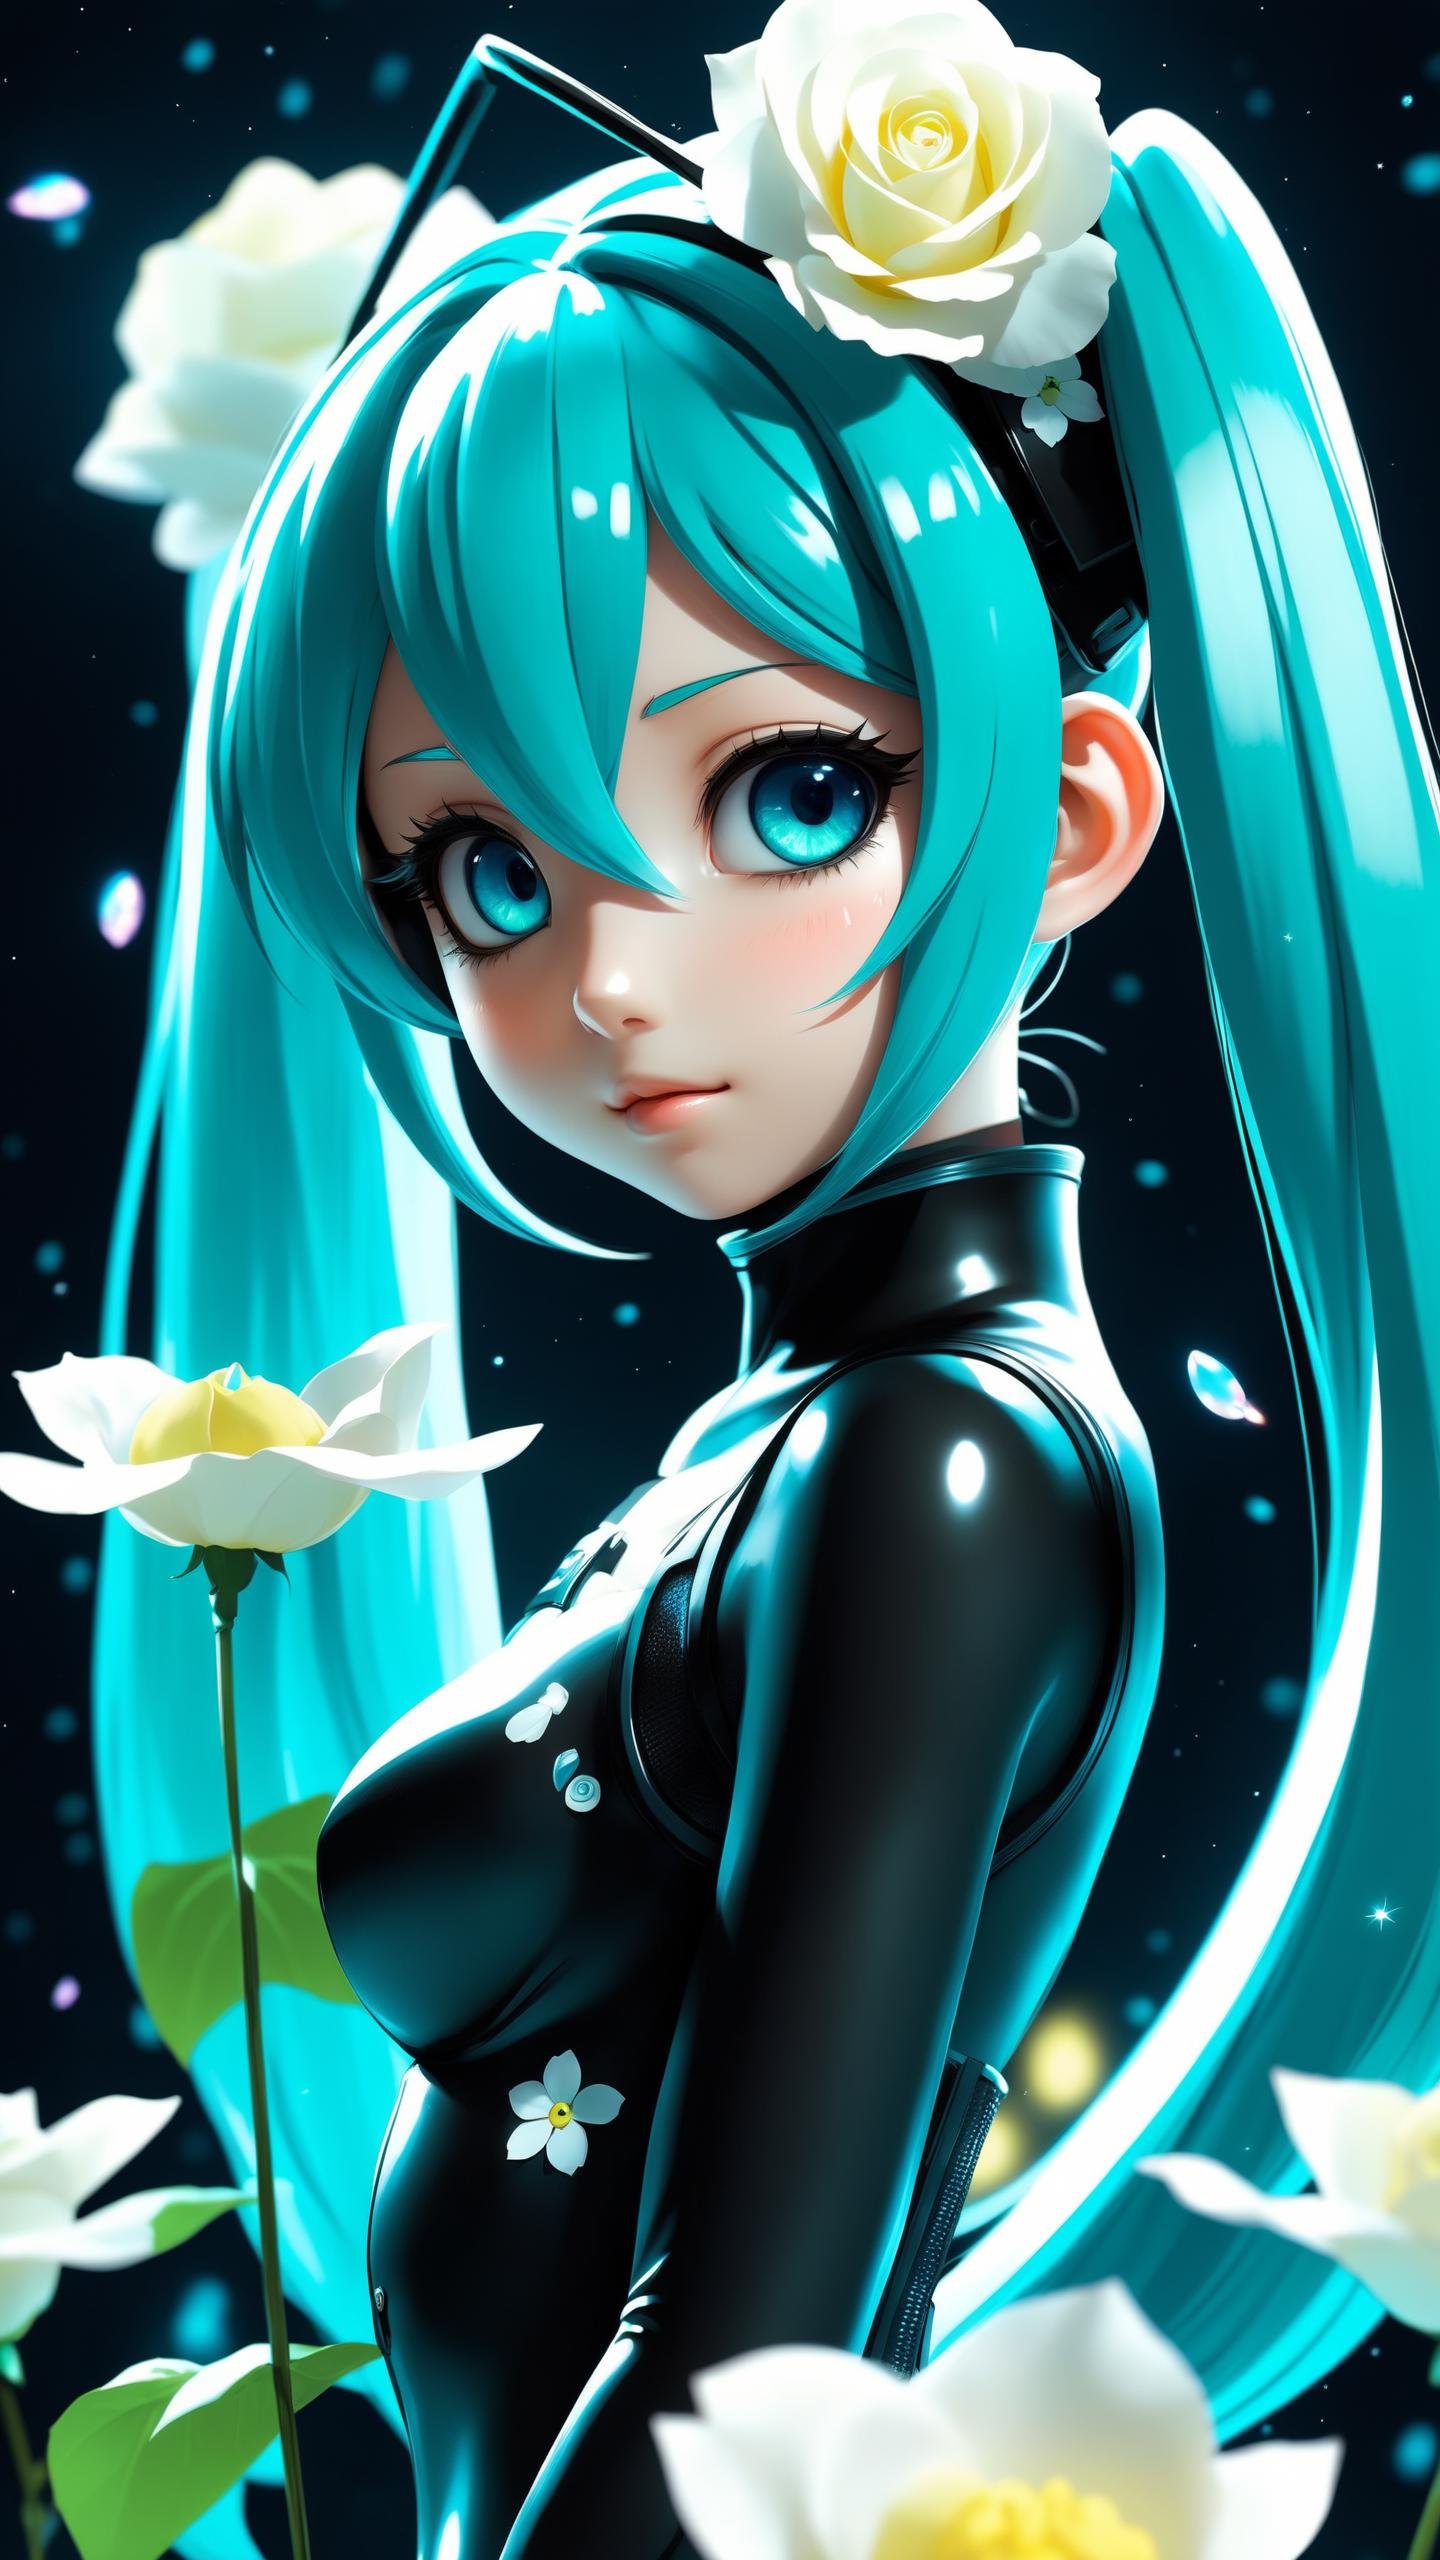 "face focus, masterpiece, best quality, 1girl, hatsune miku, goth hatsune miku, kawaii cute hatsune mike in a cartoon style wearing latex clothing, suggestive face, hentai face, sime nude, white roses, petals, night background, fireflies, light particle, solo, aqua hair with twin tails, aqua eyes, standing, pixiv, depth of field, cinematic composition, best lighting, looking up